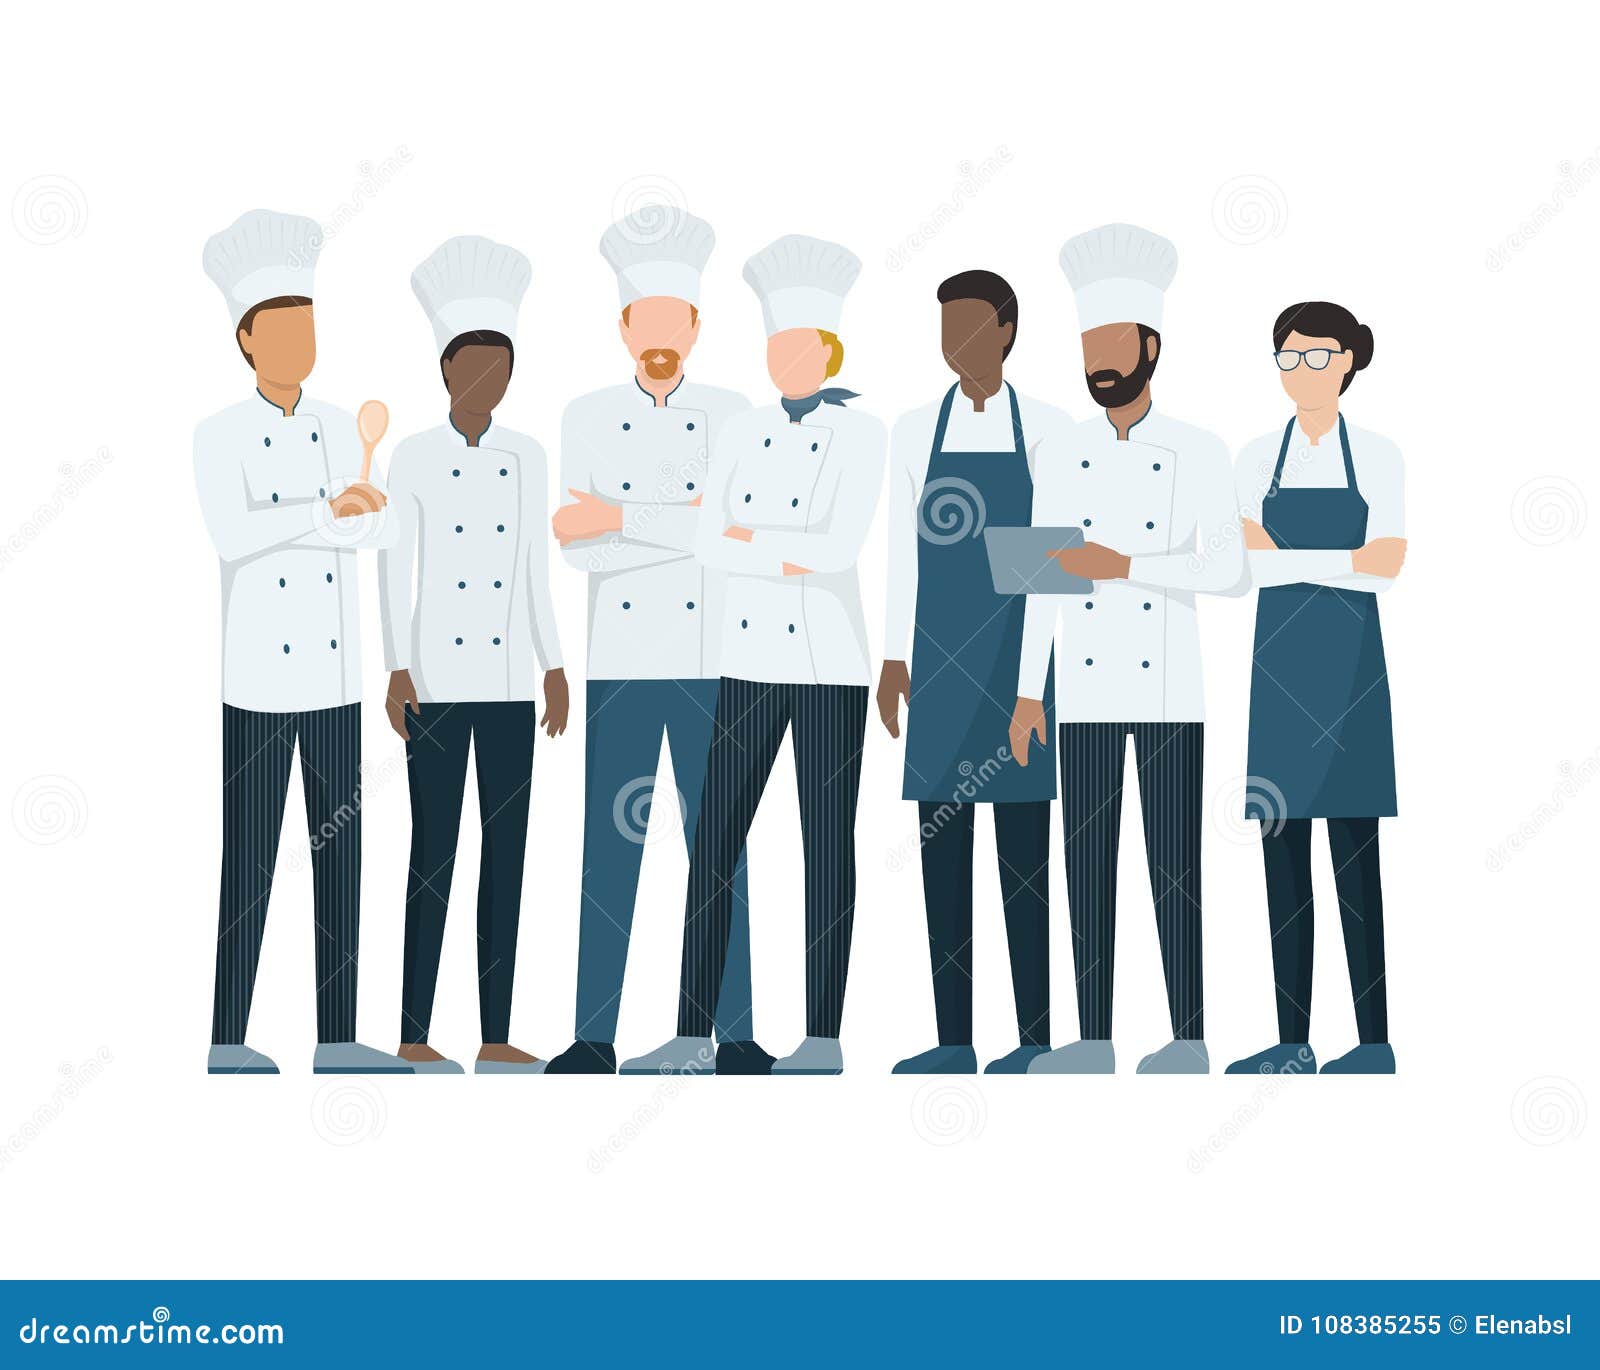 professional chefs standing together